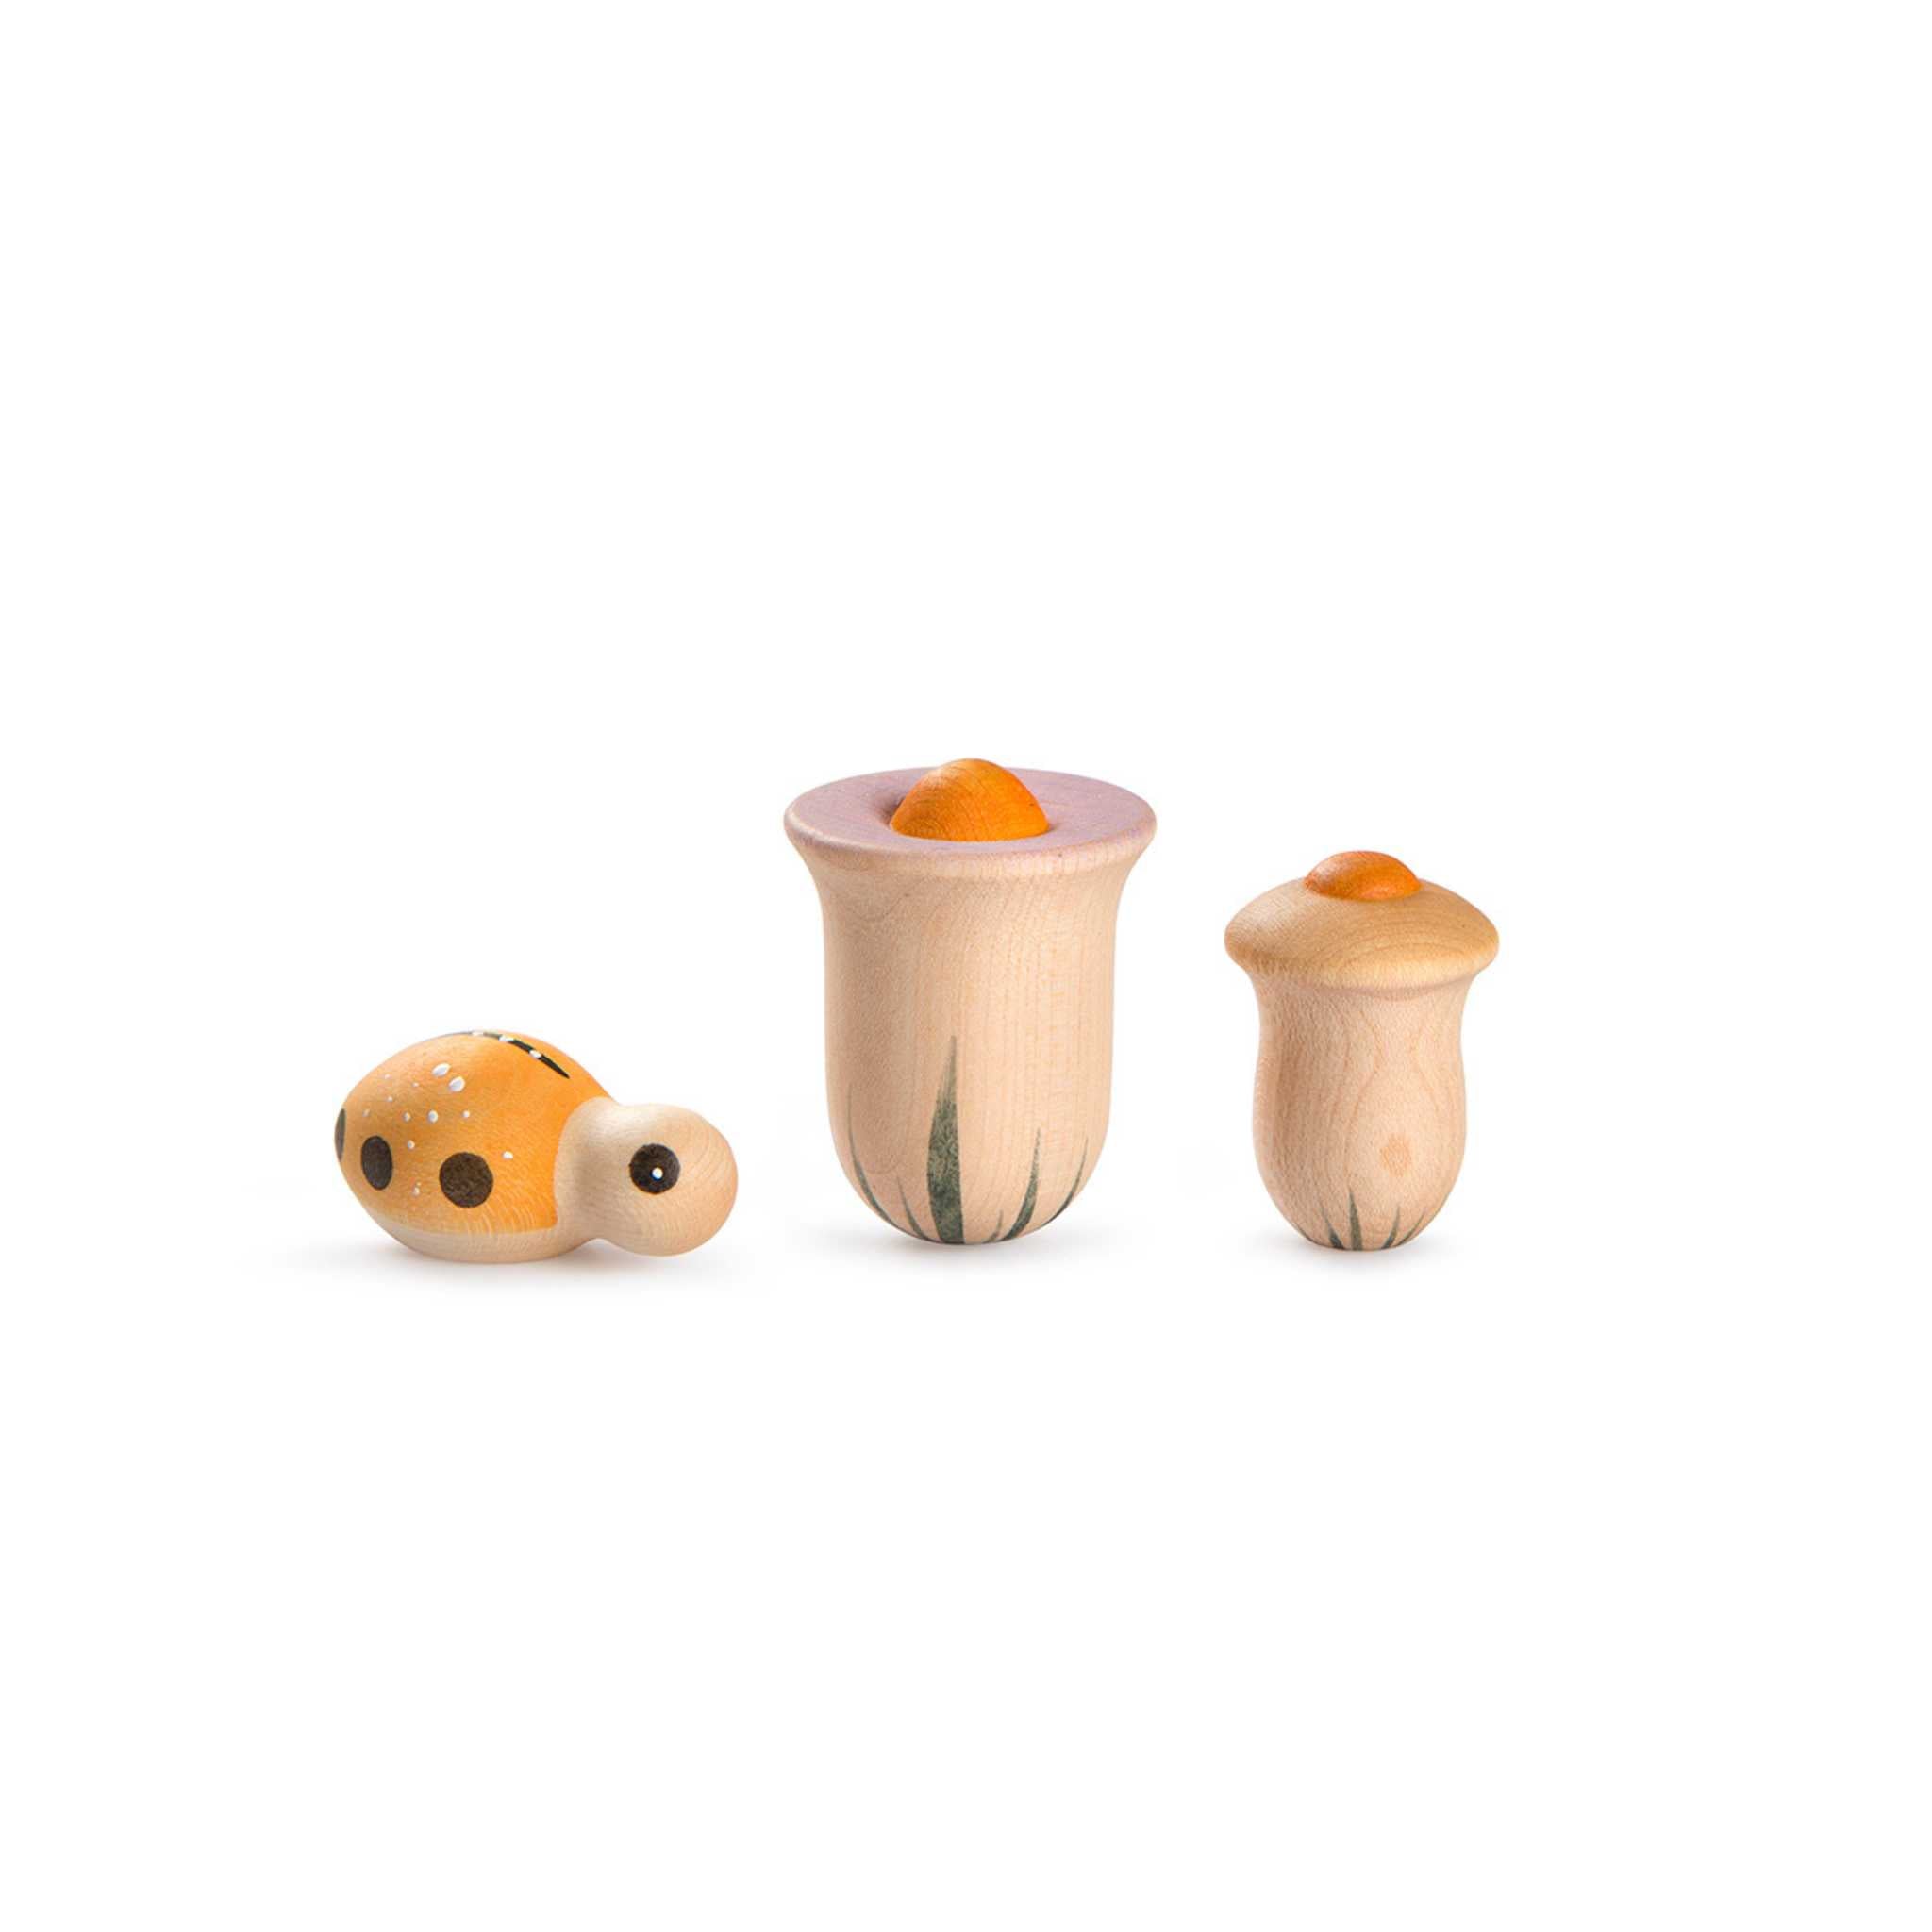 3 Wooden Toys From Grapat Lucky Lucky Collection on White Background